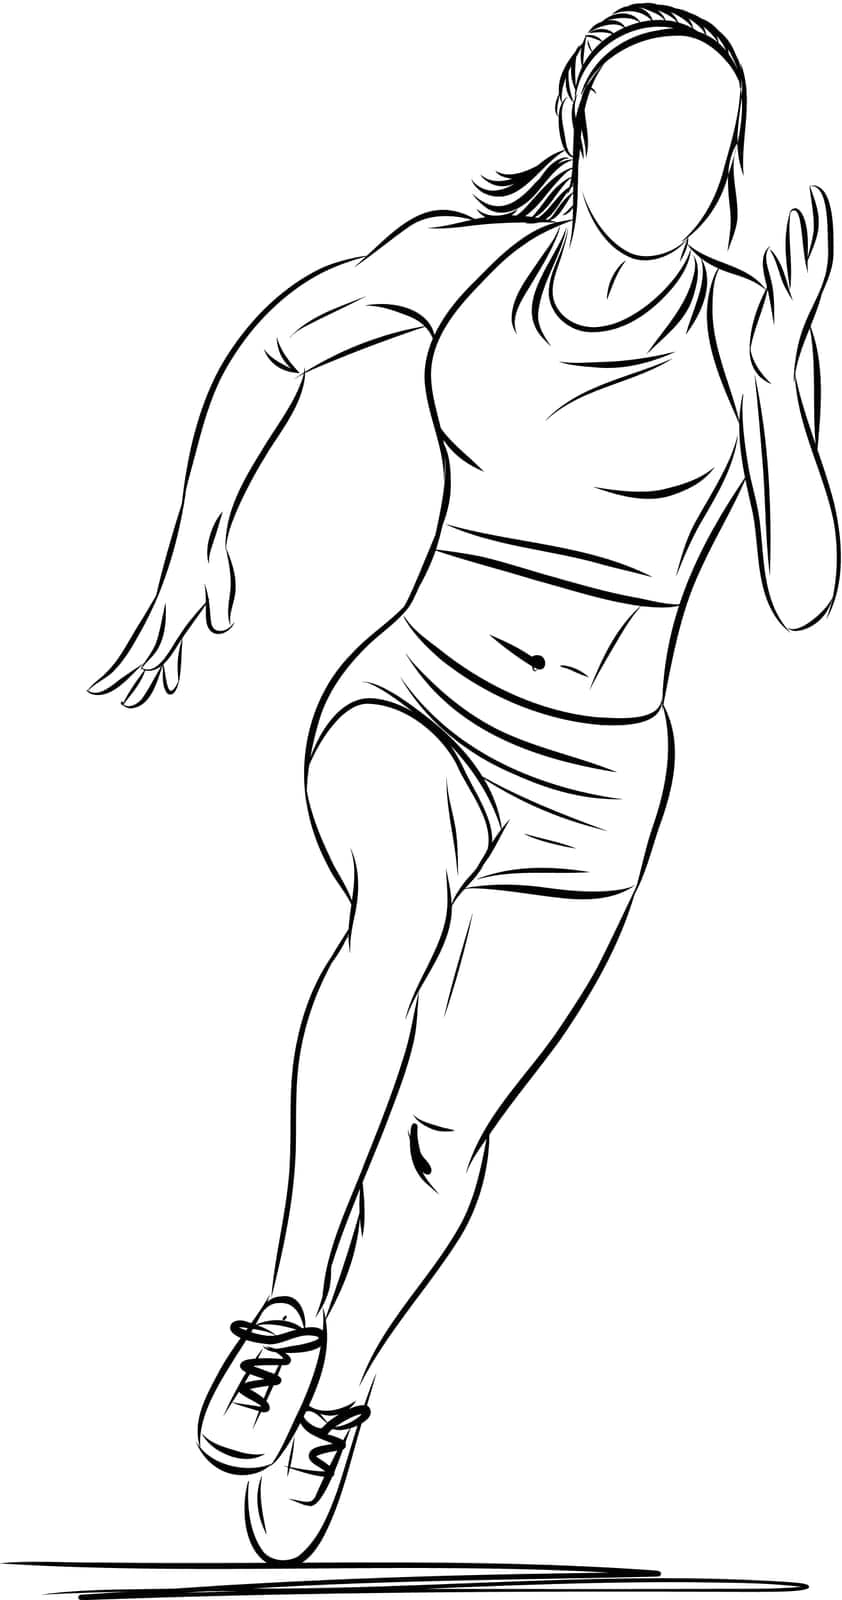 Sketch of running young woman, Hand drawn vector illustration